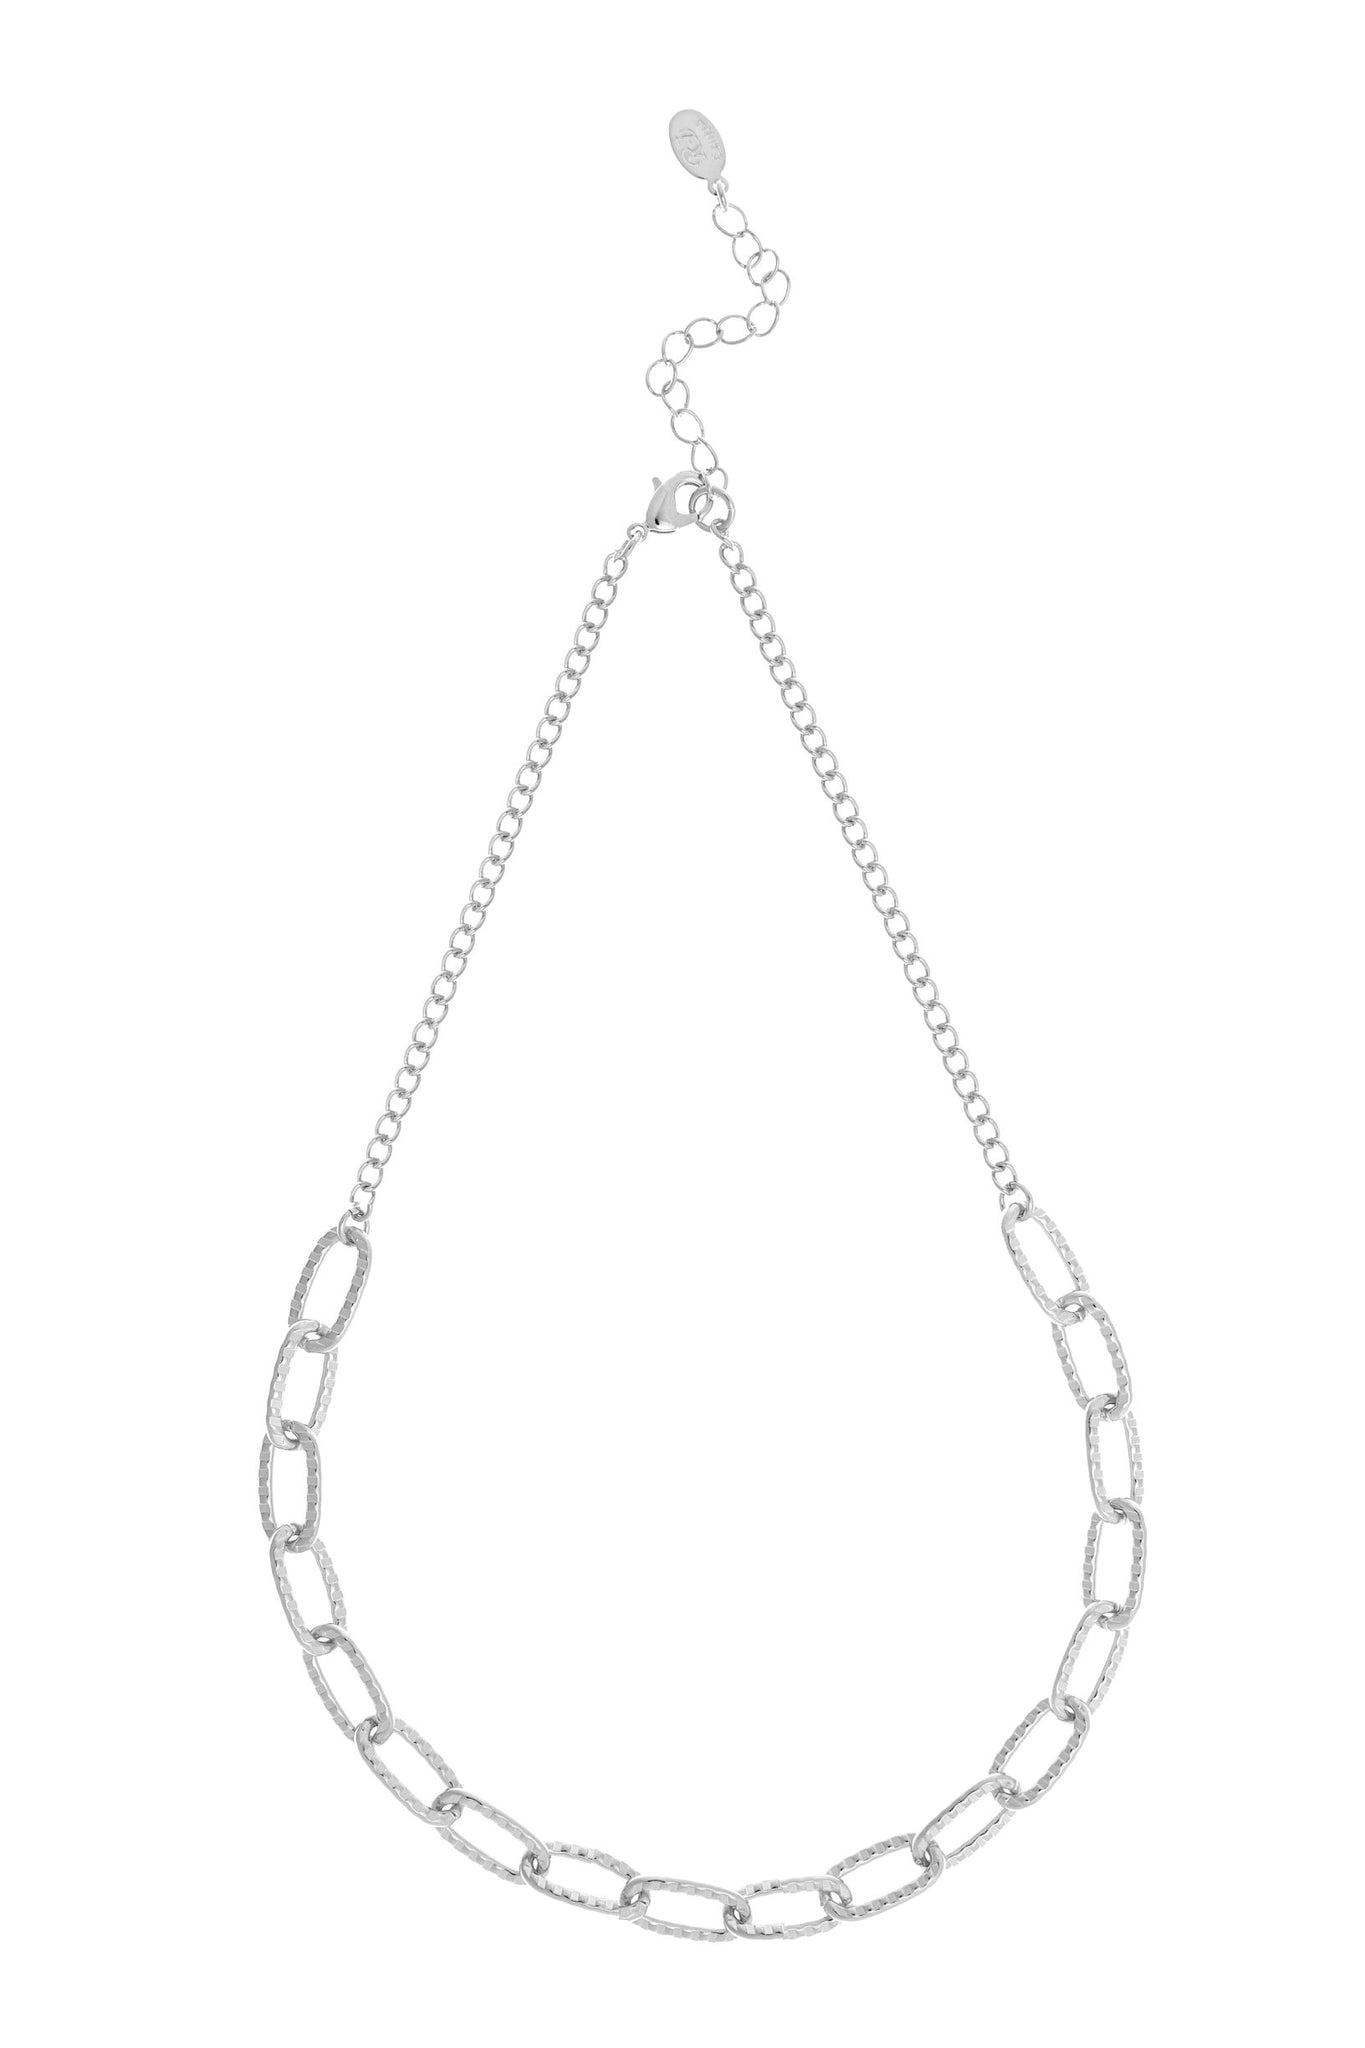 Polished Rhodium Chain Link Necklace